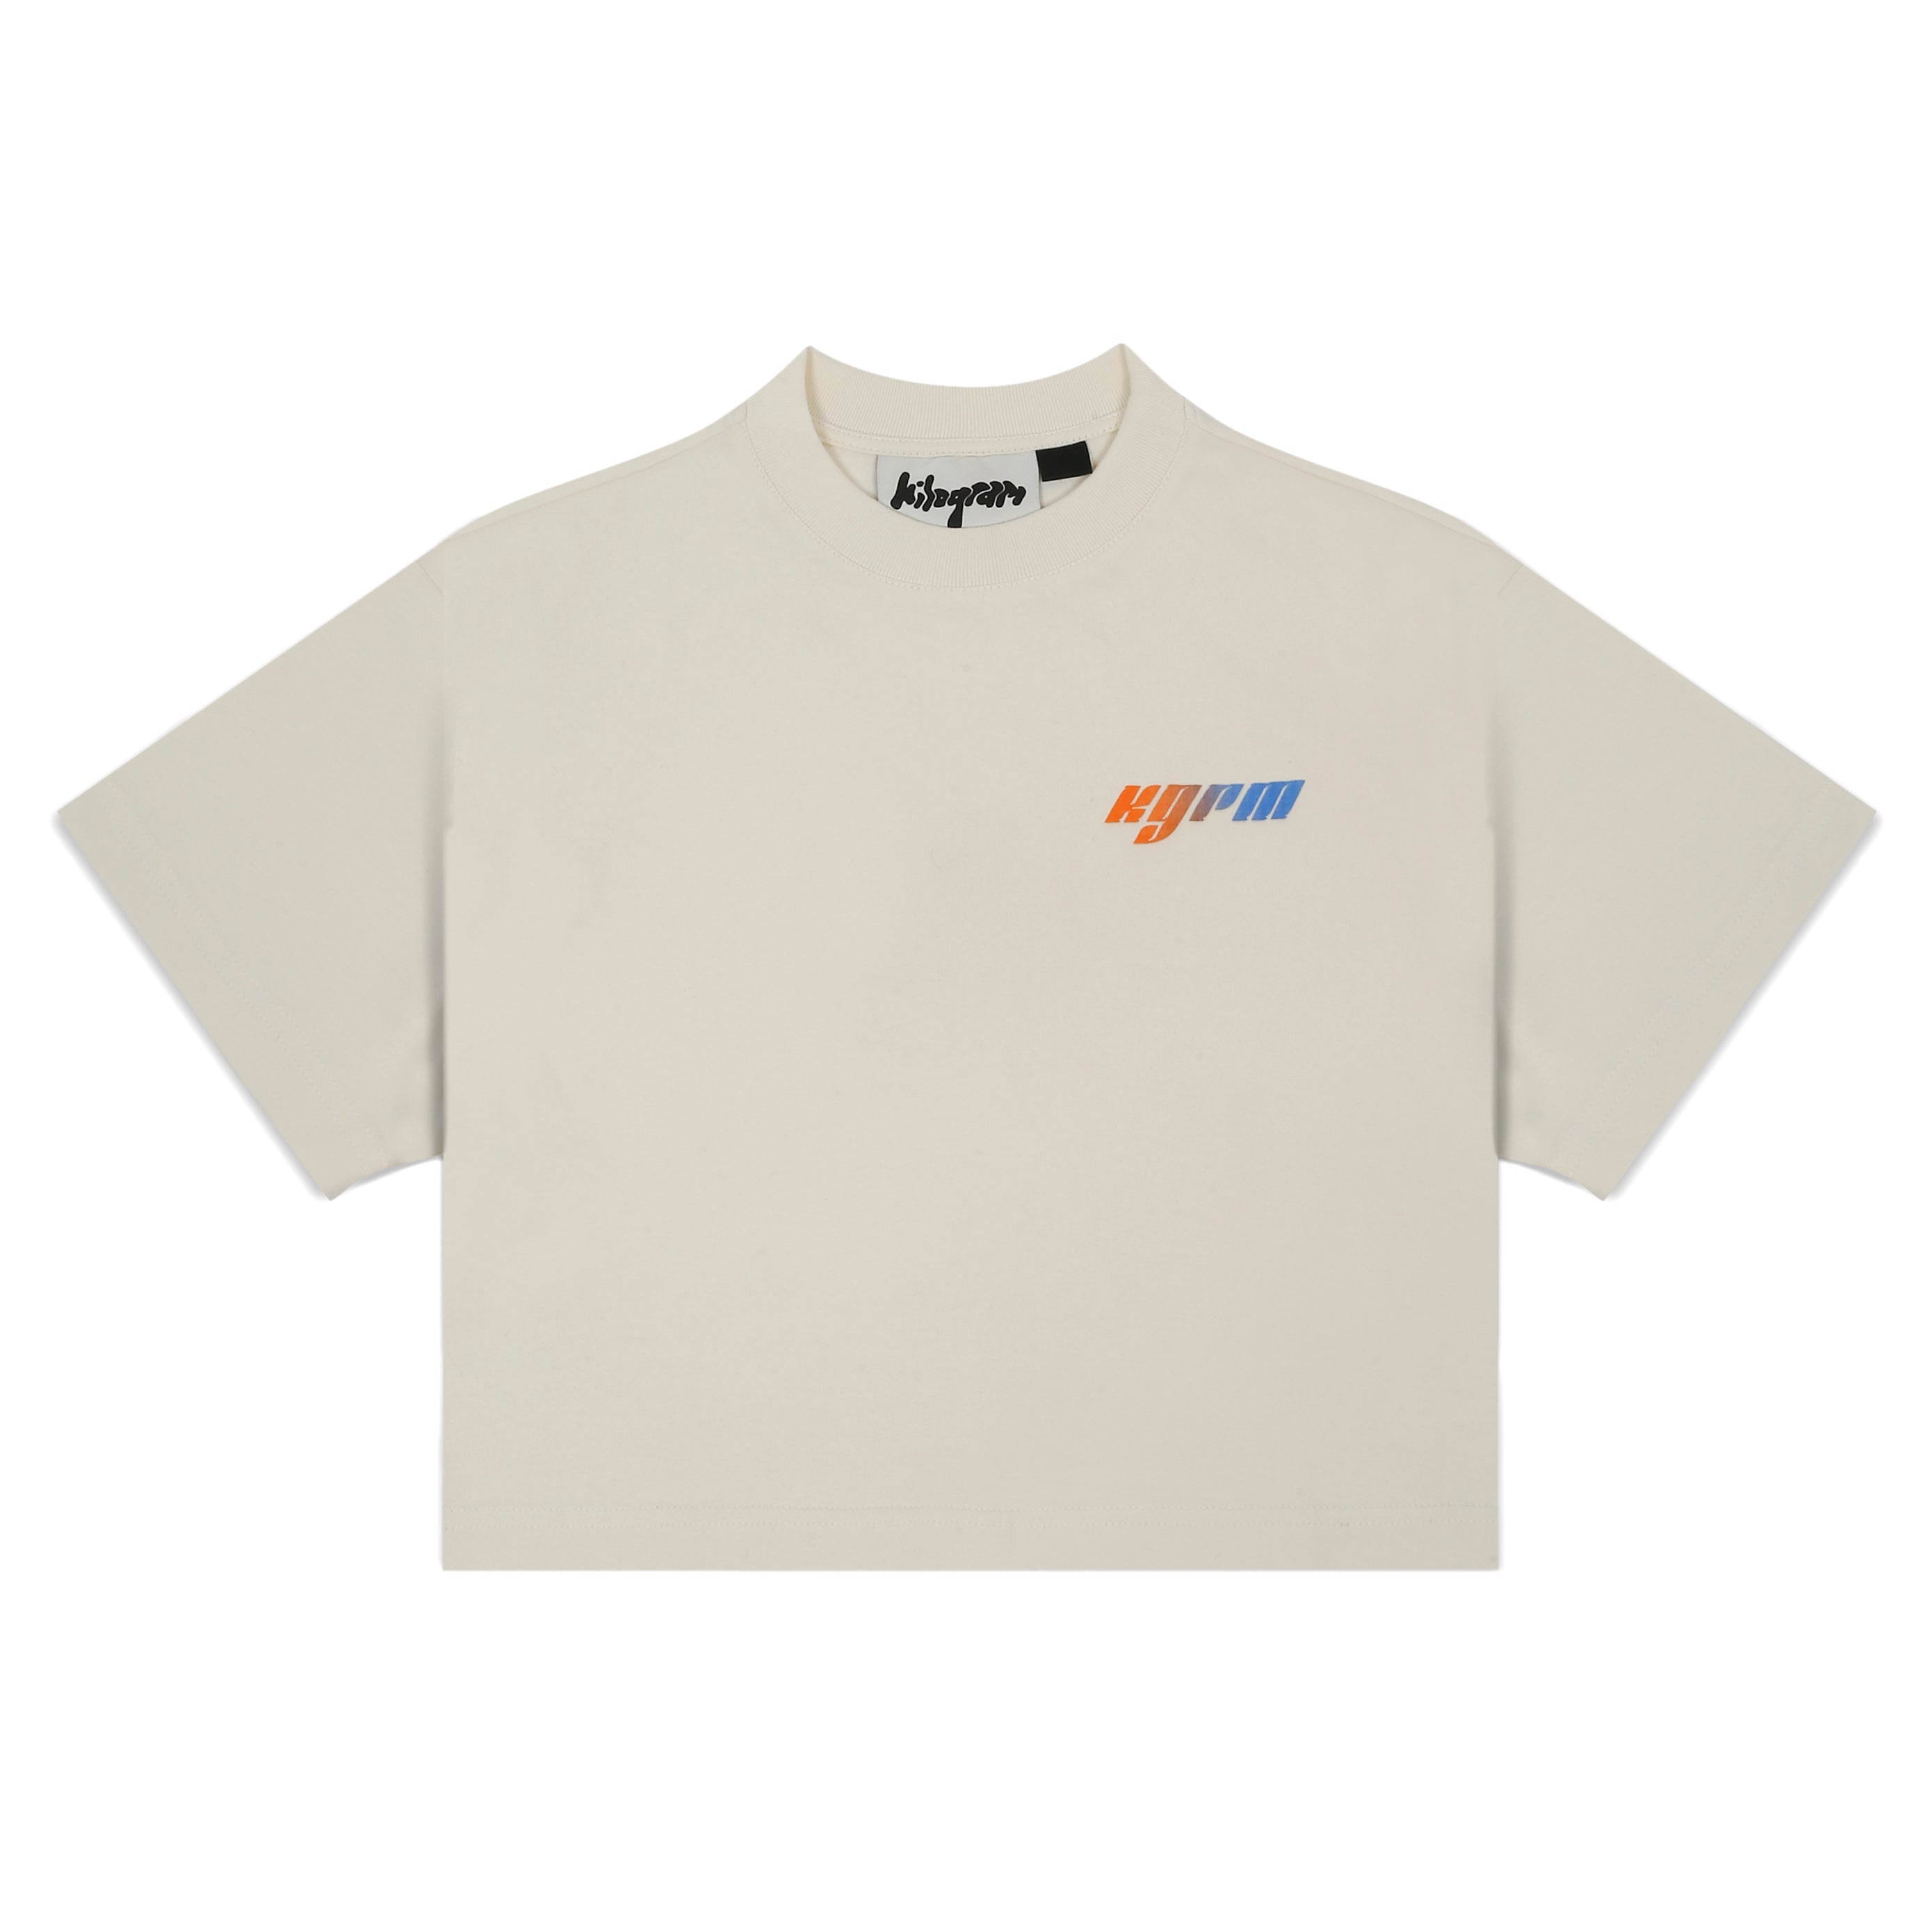 'KGRM Racer' Cropped Tee